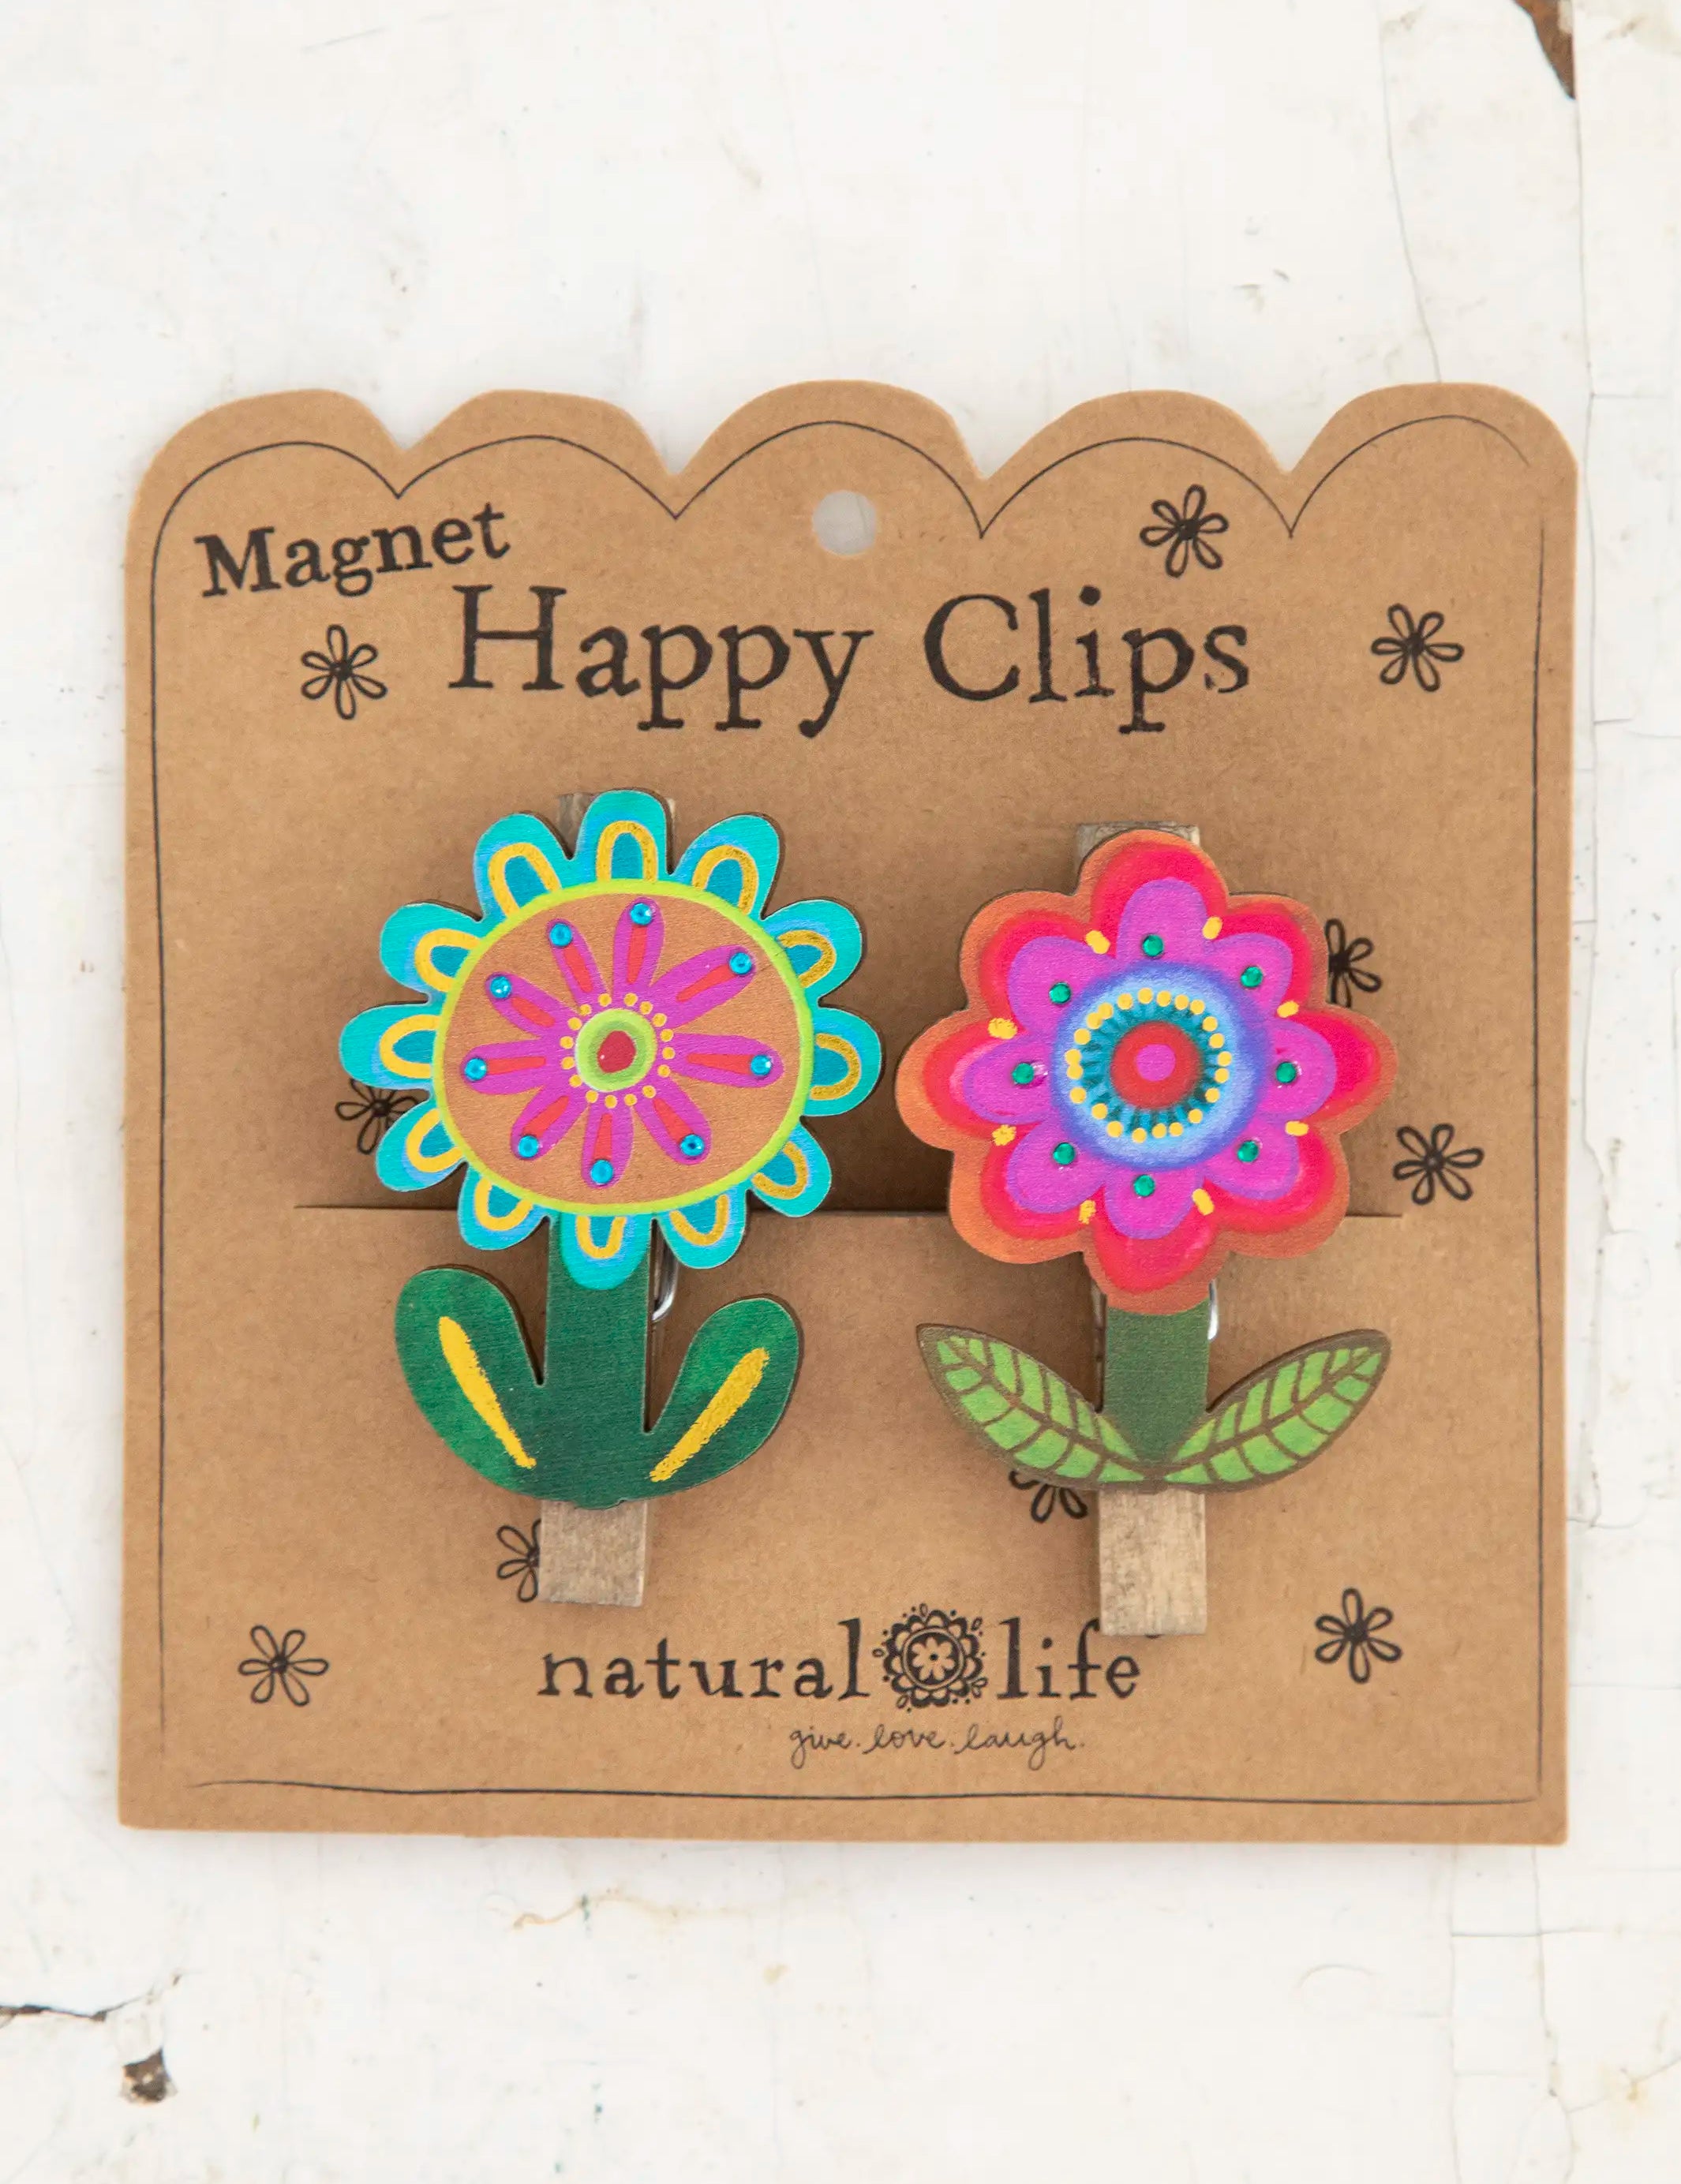 Natural Life - Magnet Happy Clips